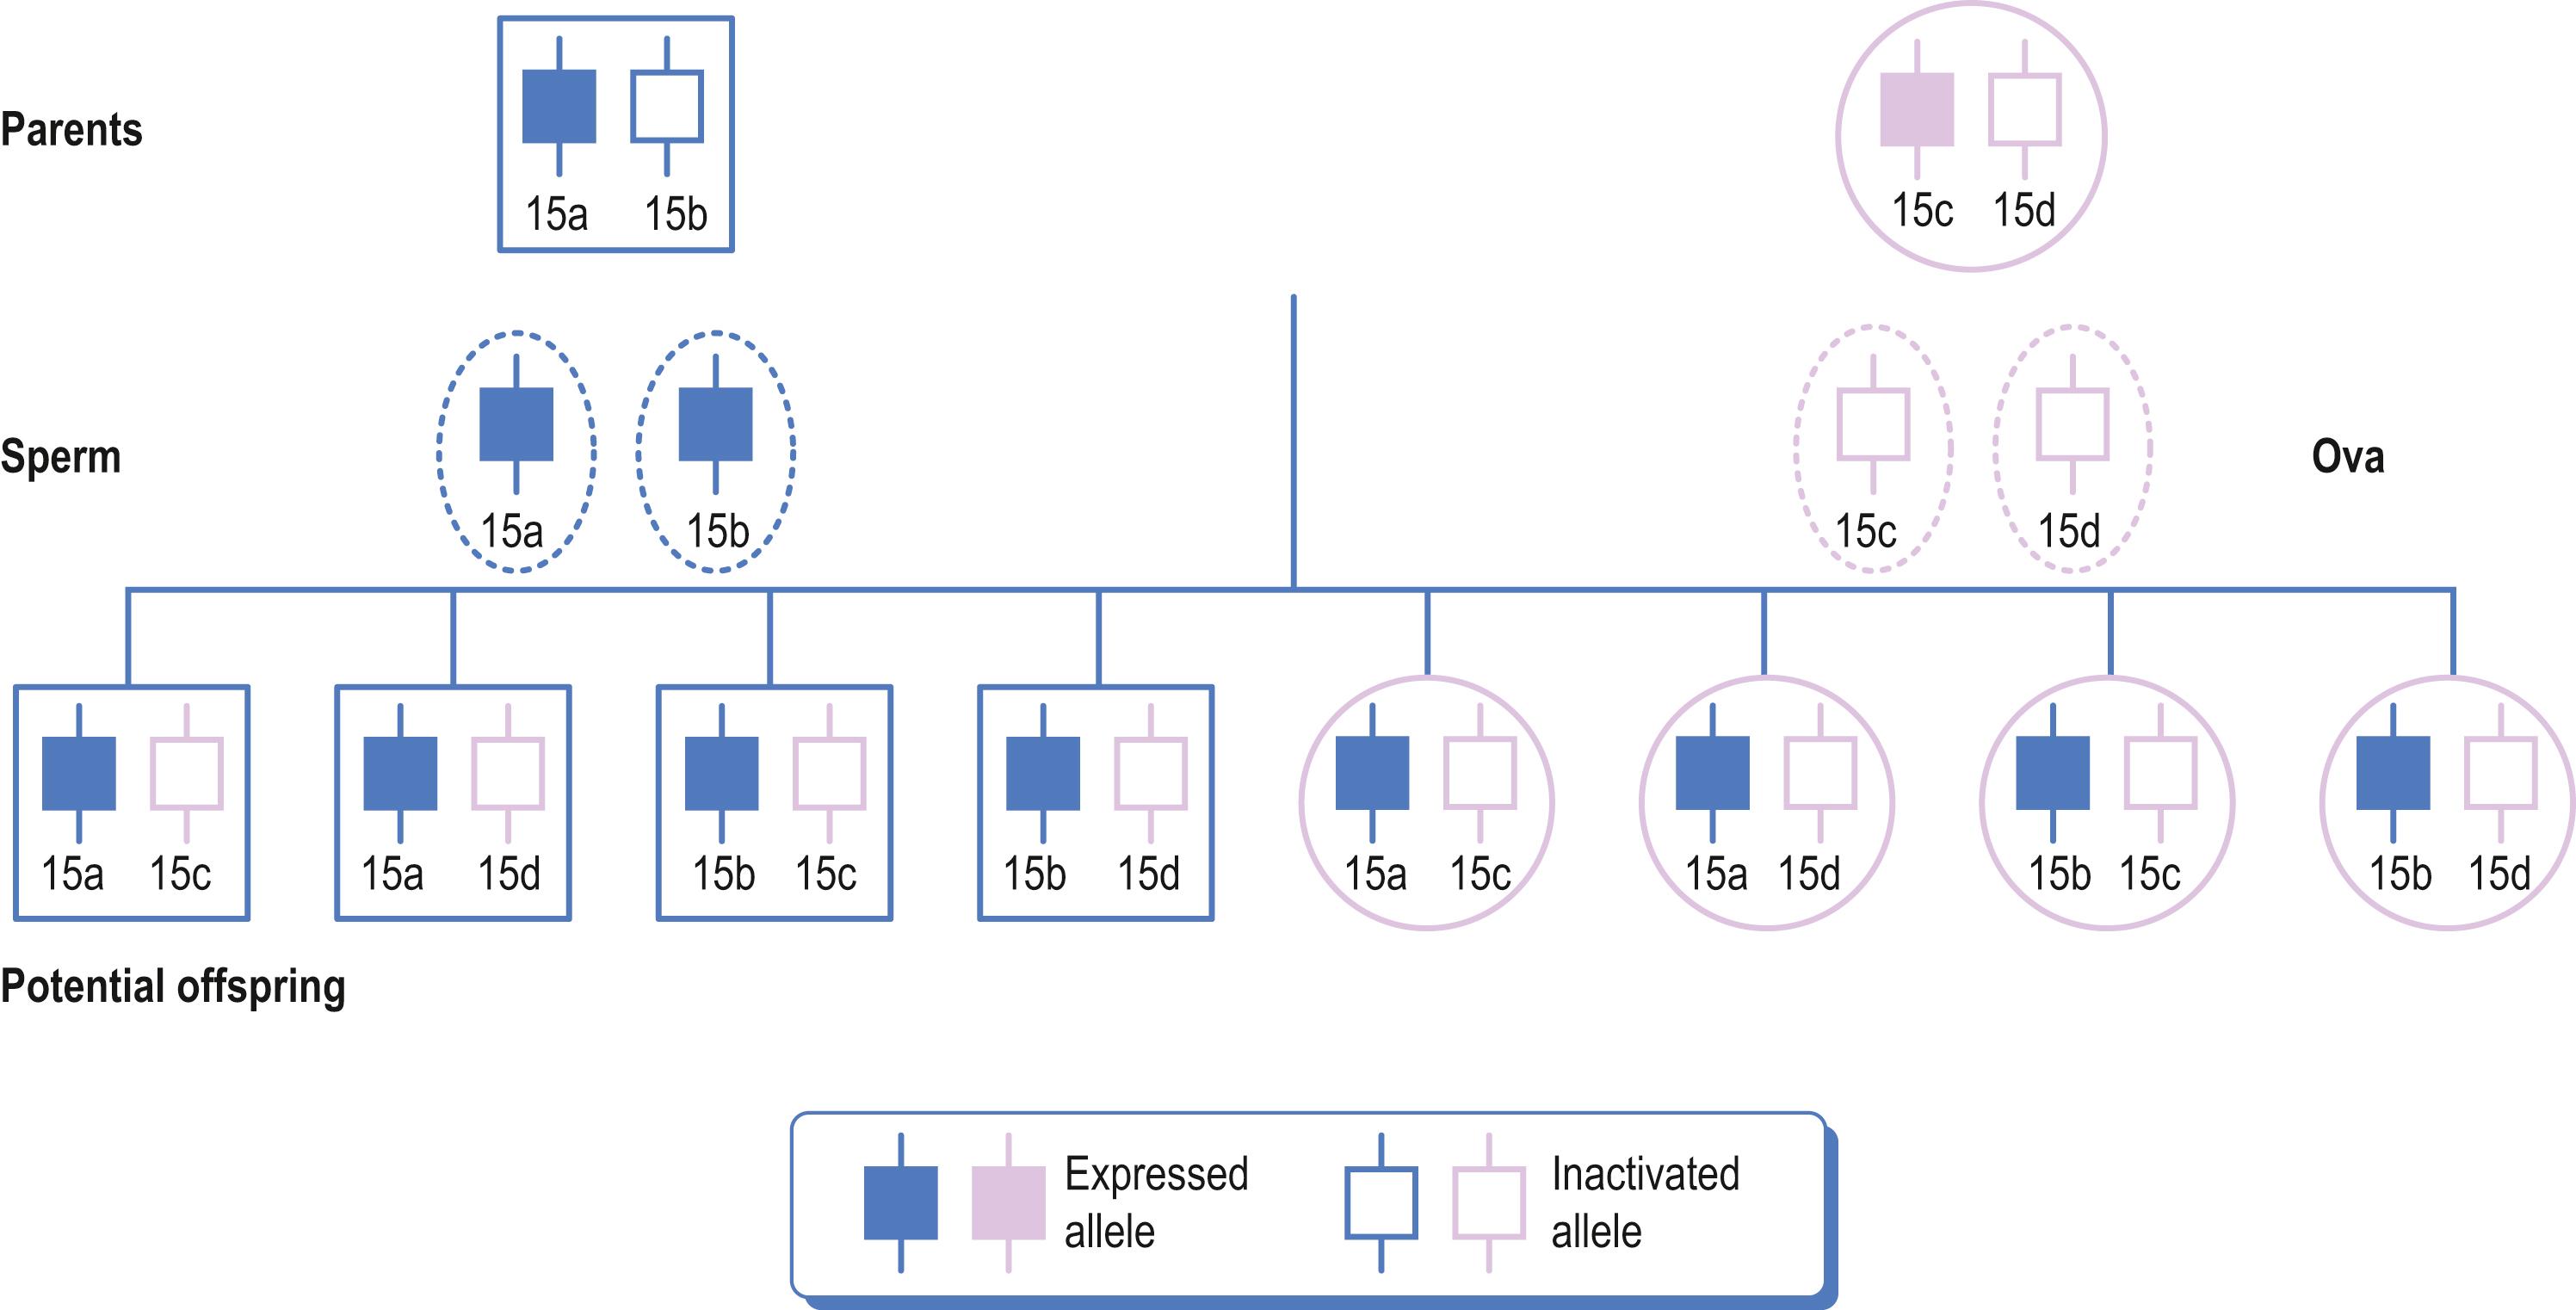 Fig. 5.2, The inheritance of a maternally imprinted gene. Father represented in blue. Mother represented in purple. Only the paternally derived copies are expressed. In the ova, imprinting inactivates all maternally derived copies of the allele.